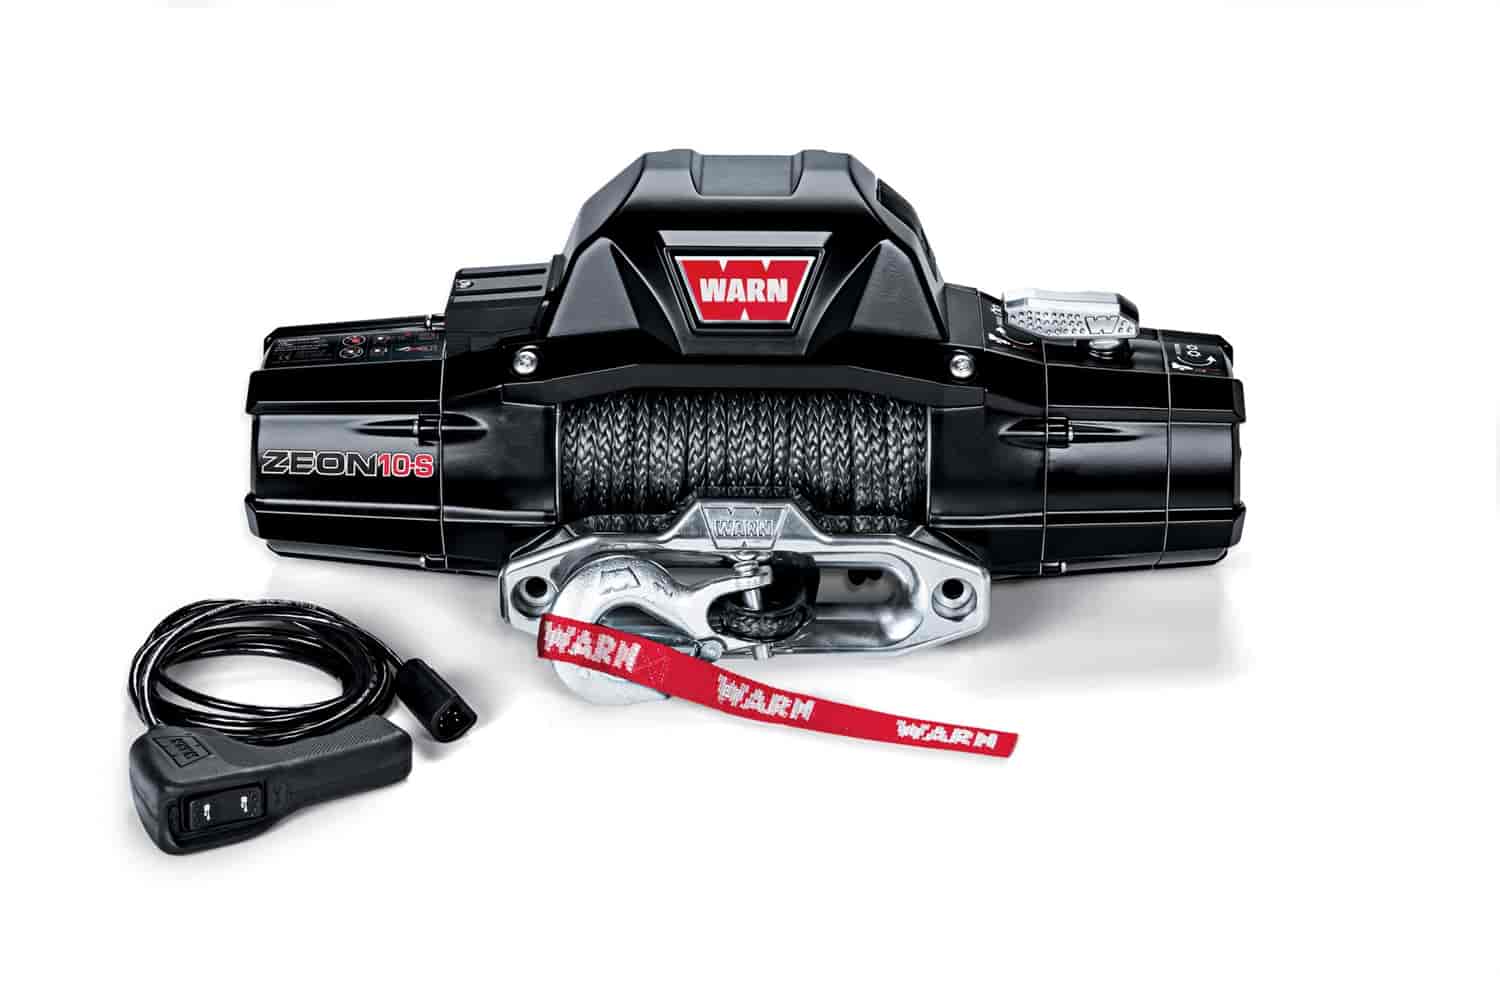 Zeon 10-S Winch with 100 Ft. Spydura Synthetic Rope and Hawse Fairlead